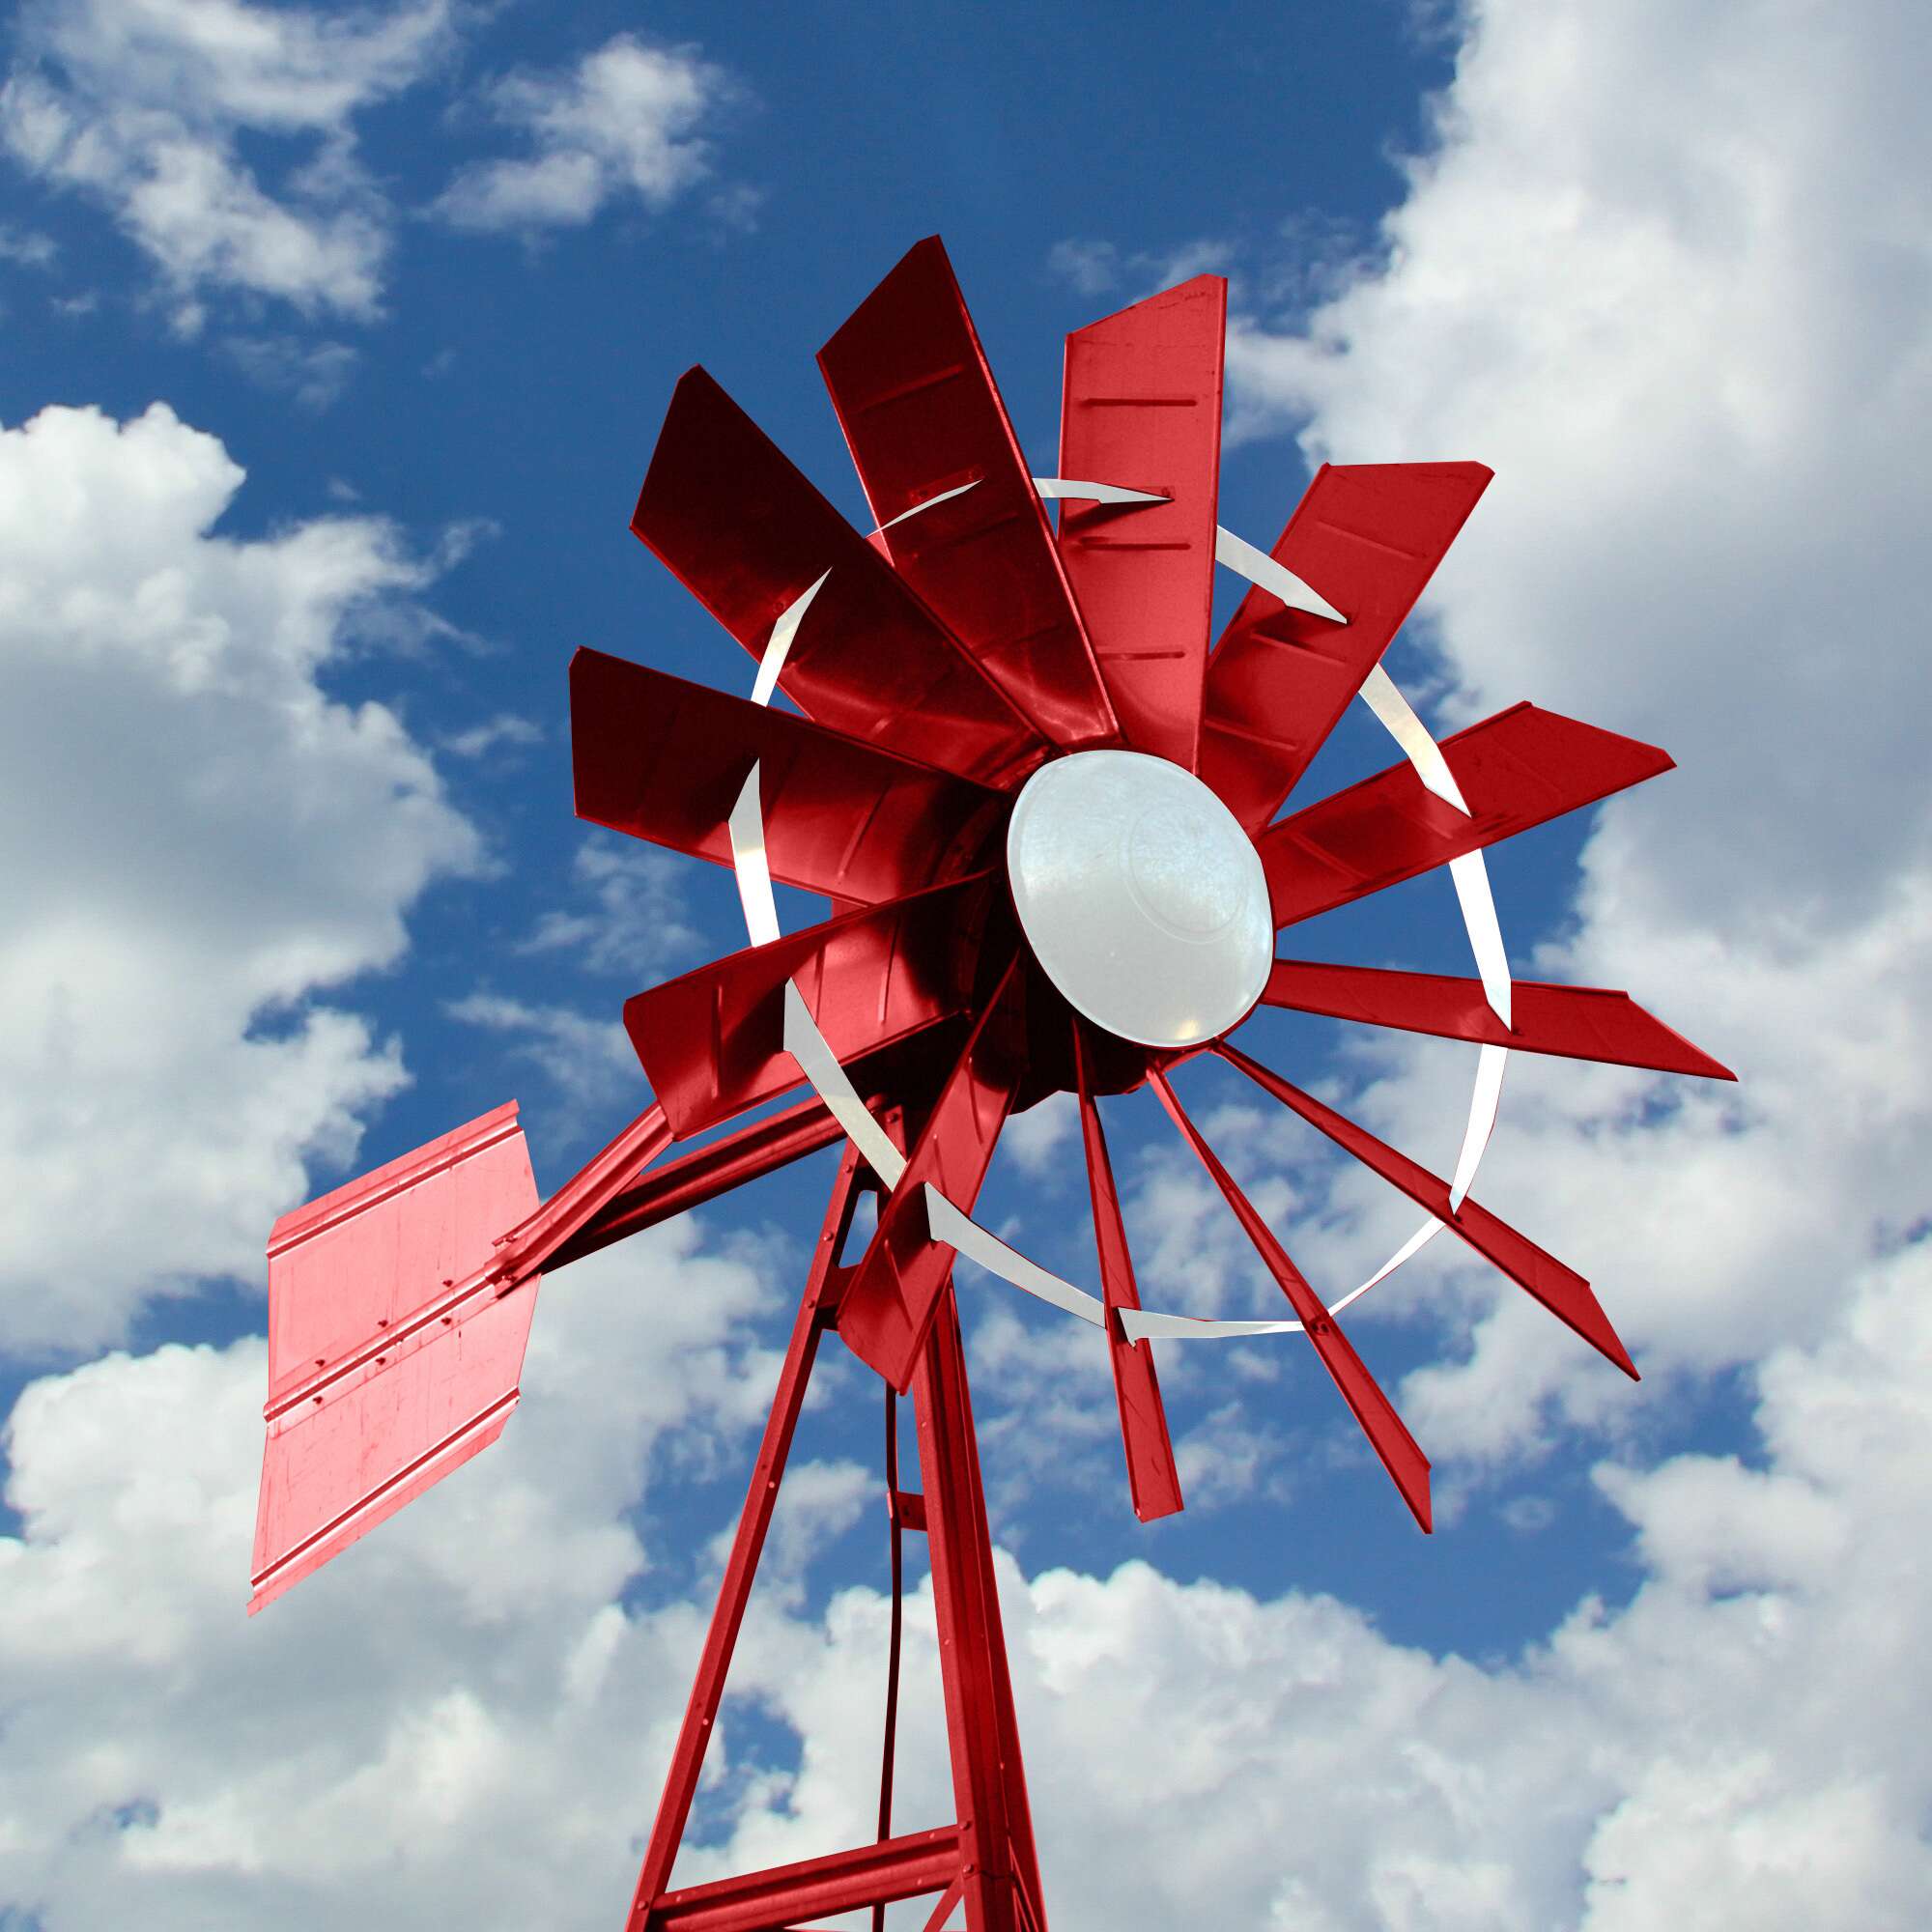 Outdoor Water Solutions Aeration Windmill System 23ft Tall Red and White